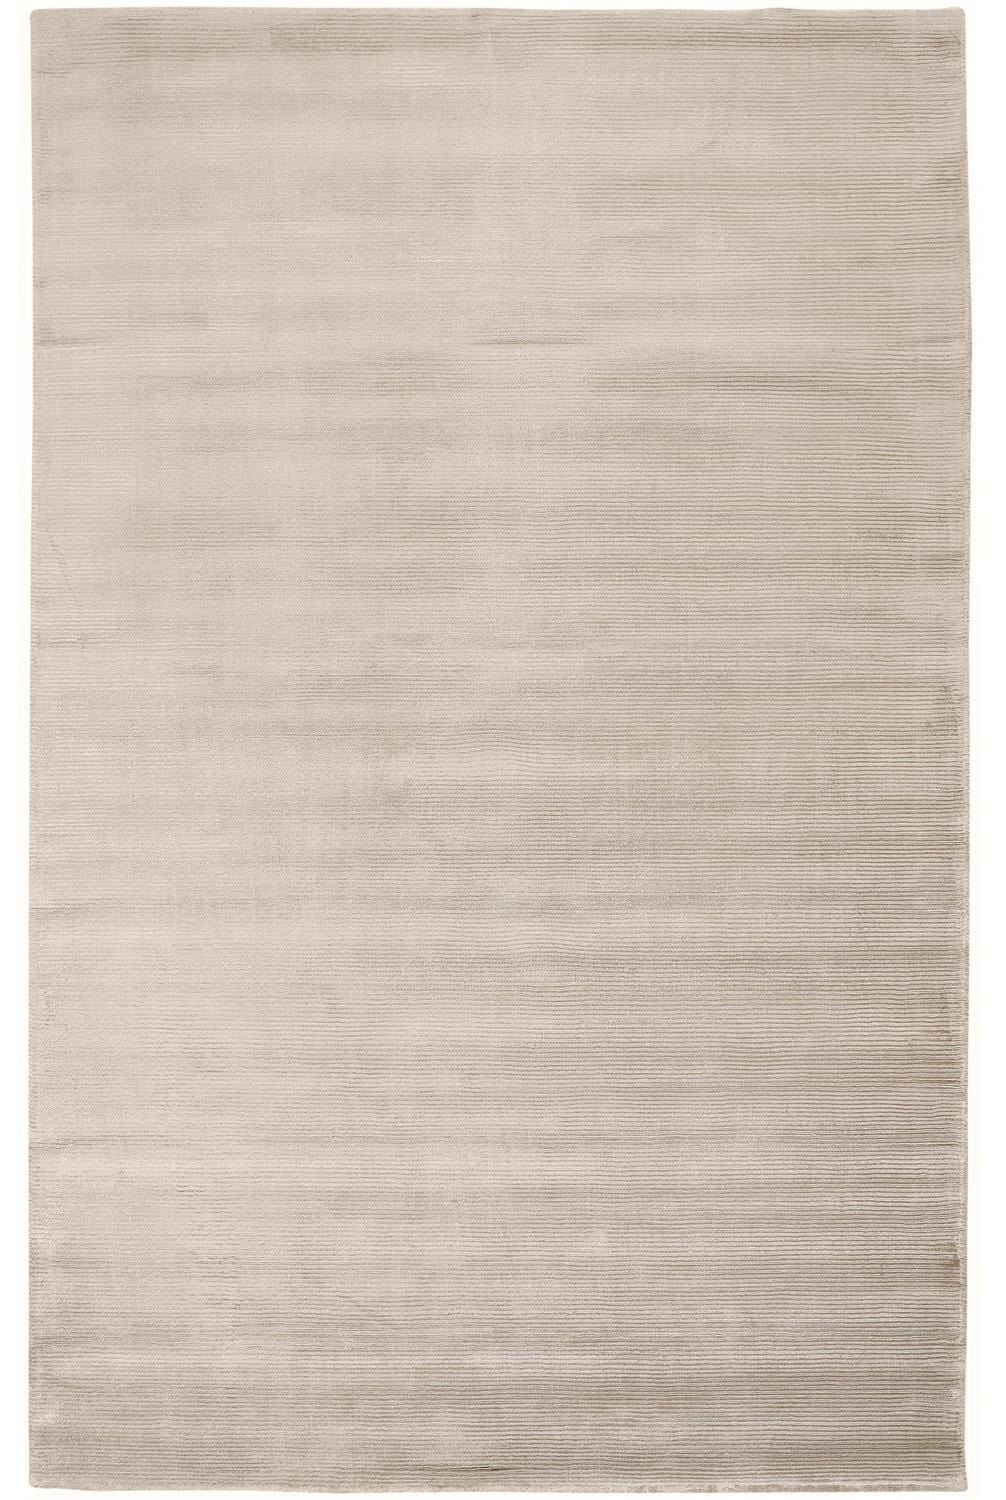 Feizy Feizy Batisse Luxe Viscose Handwoven Rug - Available in 6 Sizes - Oyster Gray 3'-6" x 5'-6" 6698717FTPE000C50